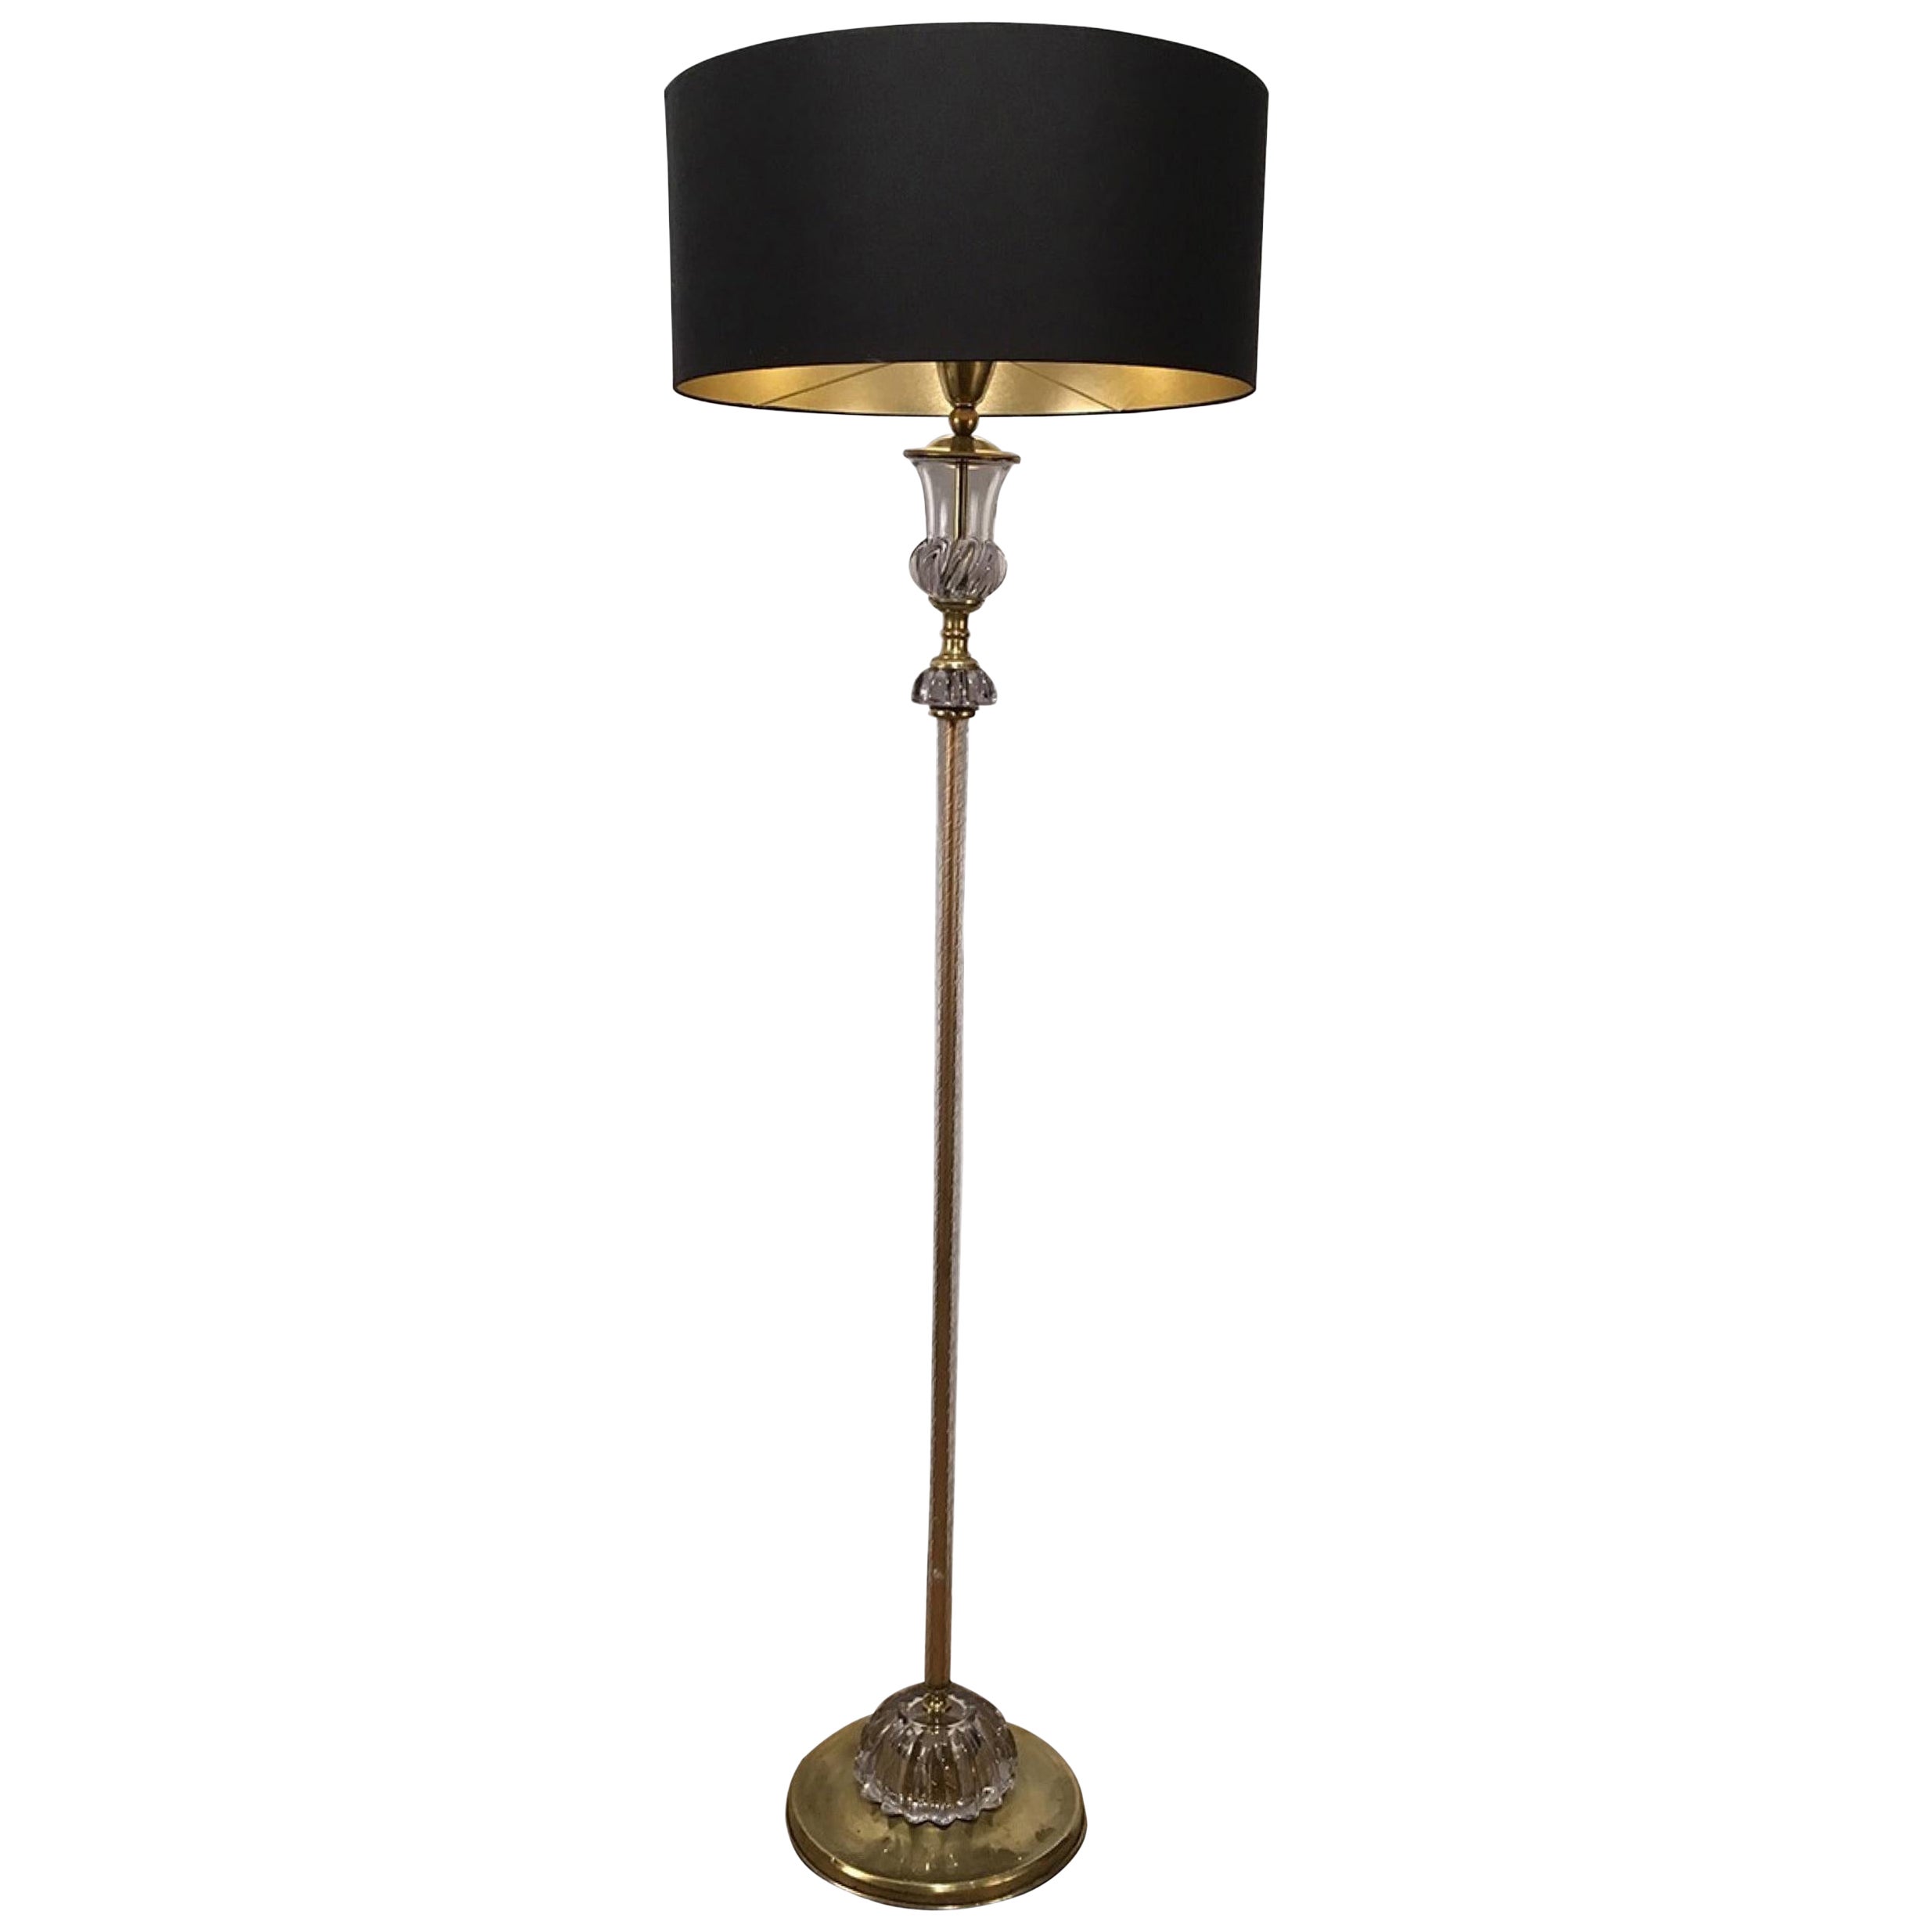 Attributed to Barovier & Toso, Murano Glass Floor Lamp, circa 1940 For Sale